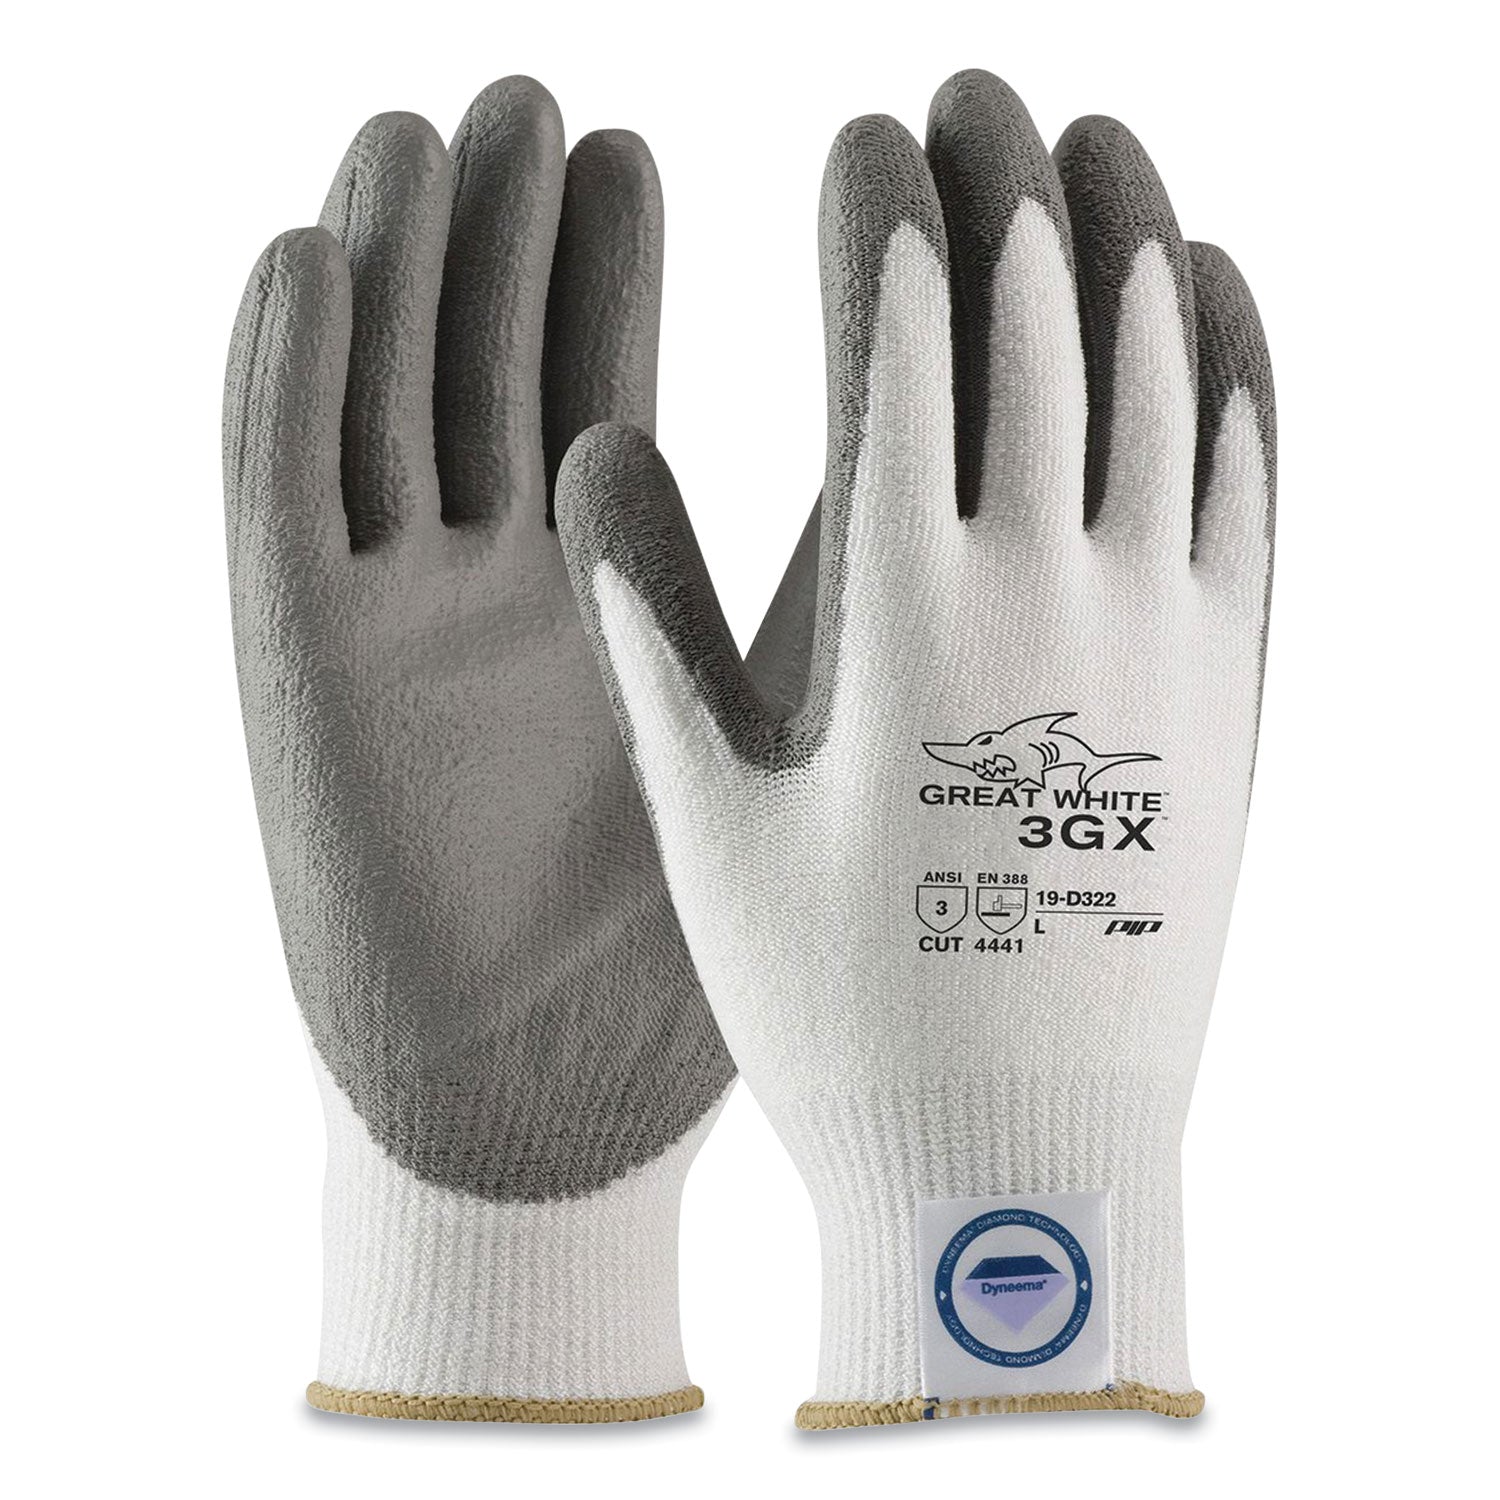 great-white-3gx-seamless-knit-dyneema-diamond-blended-gloves-large-white-gray_pid19d322l - 1